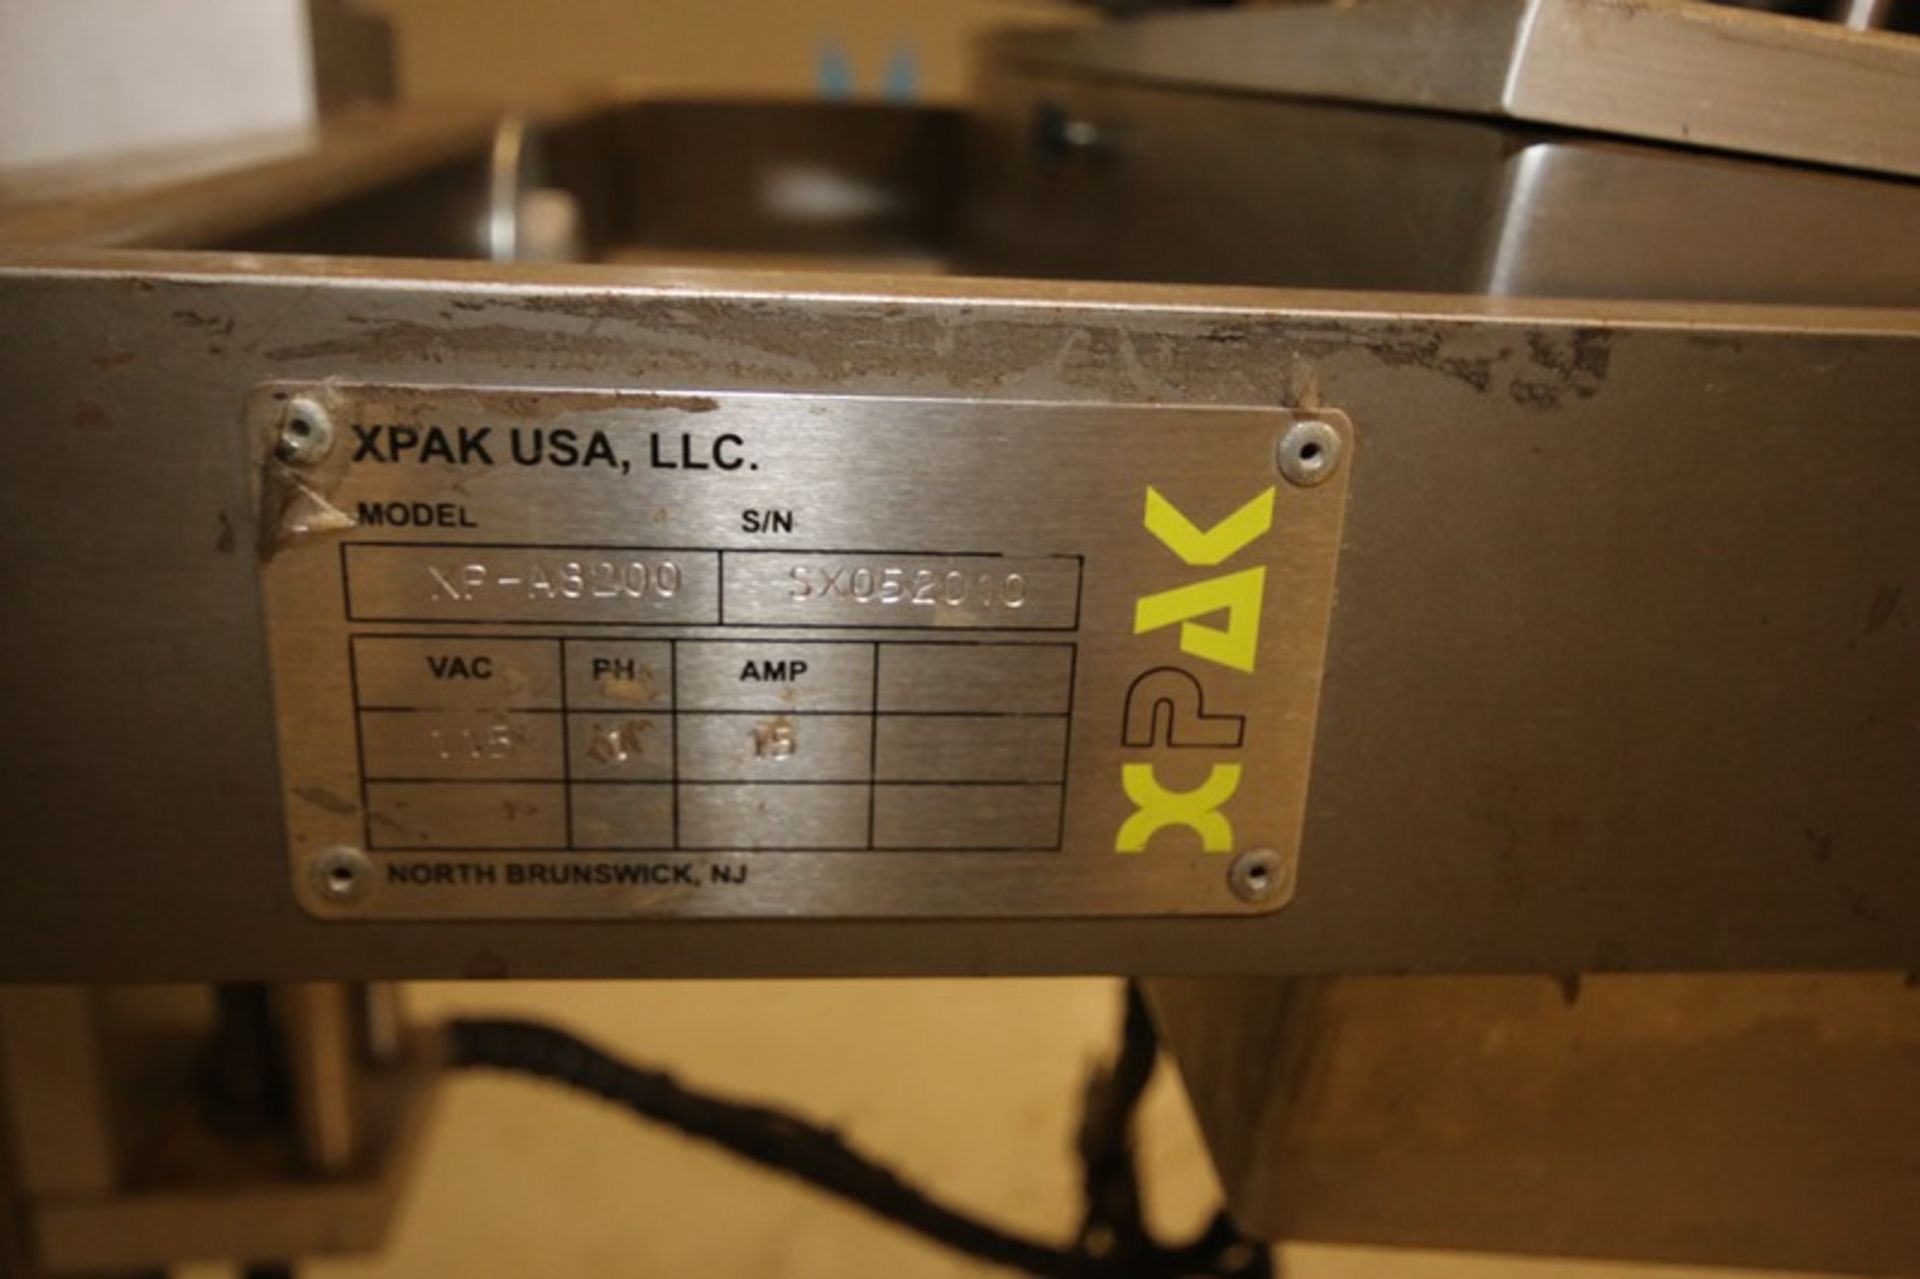 XPak Roll Fed Labeler, Model XP-A8200, SN SX052010, 115V, Mounted on Stand with Top Mounted Sato M- - Image 8 of 8